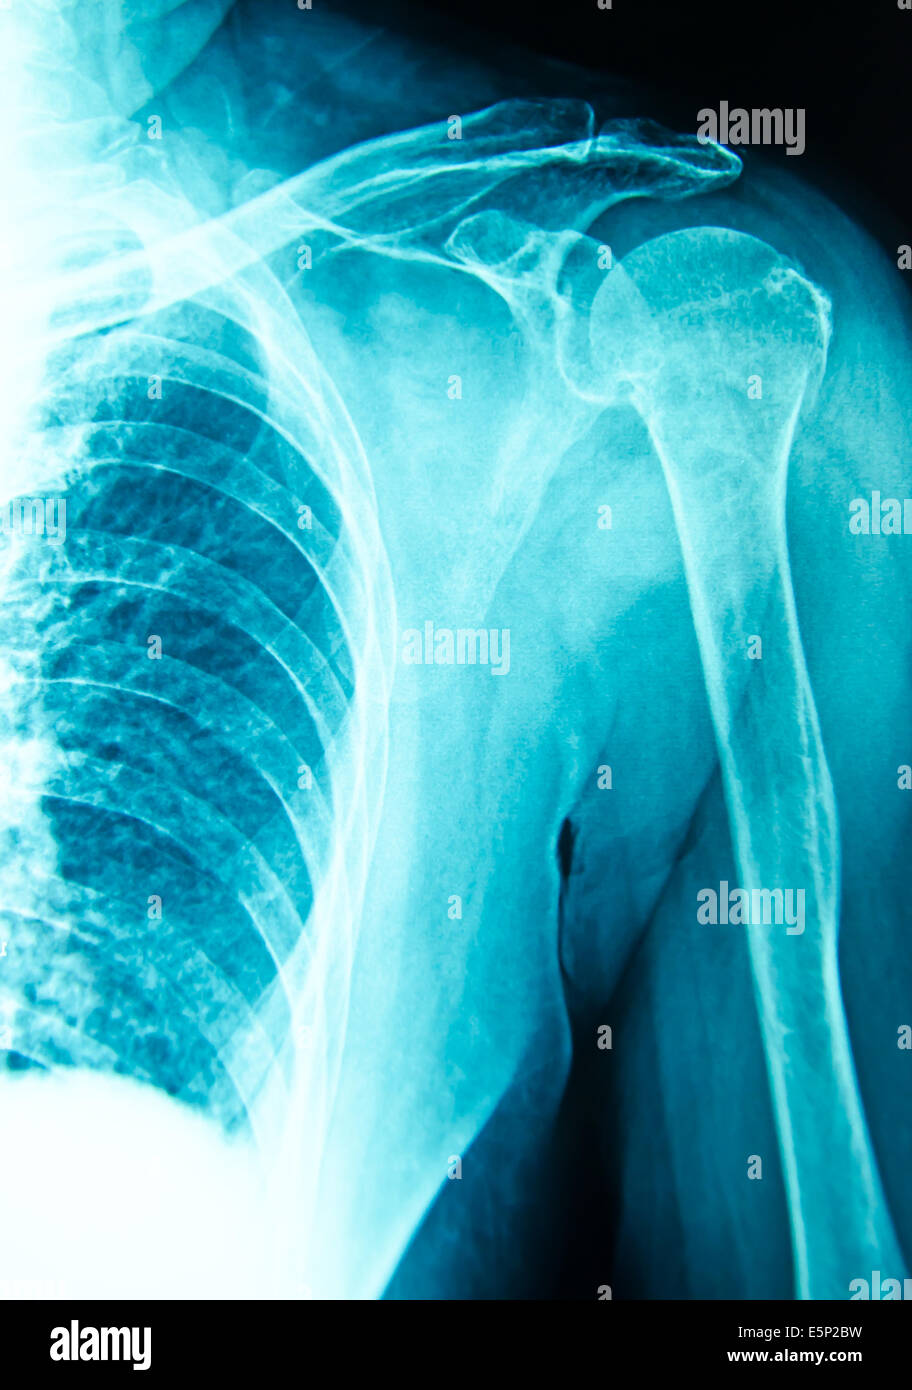 shoulder  x-ray for diagnosis injury Stock Photo